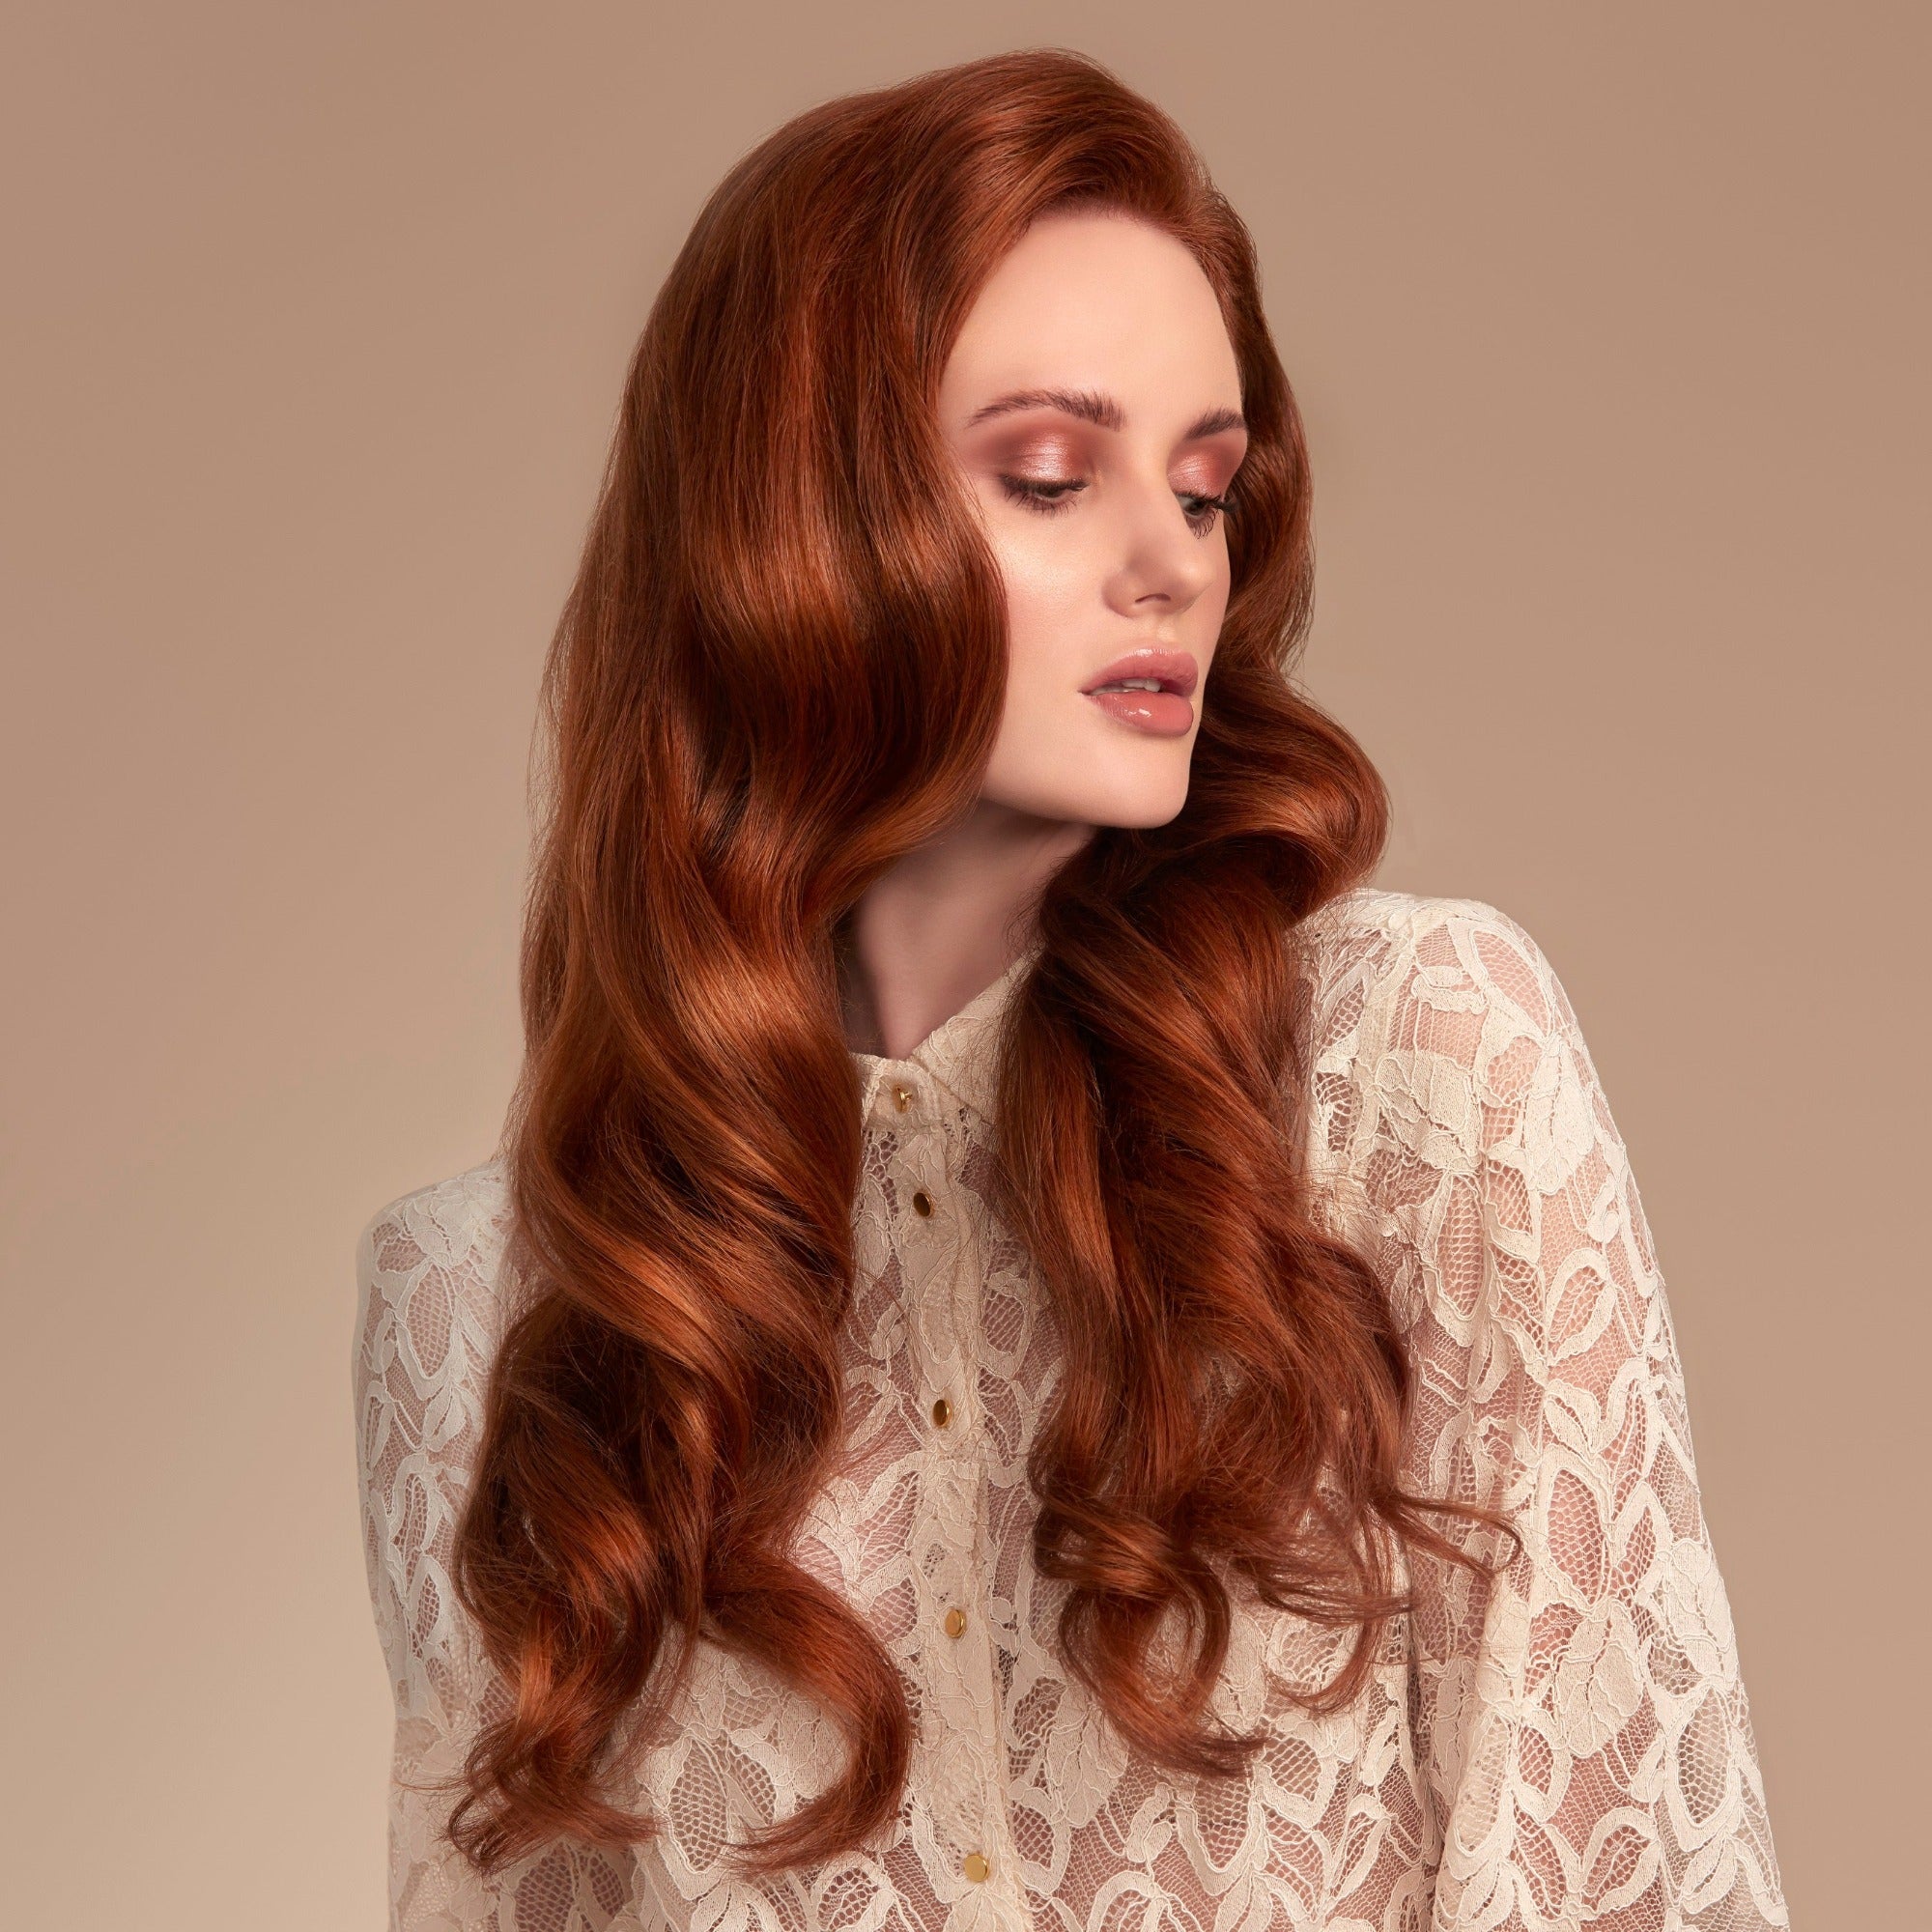 Female model with flowing long red wavy hair from using Moo and Yoo Miracle Shampoo and Conditioner and a weekly Miracle hair mask. She has a pale cream lacey top on. She is looking to the right so you can see the full side of her hair. She has super shiny long wavy hair using Moo and Yoo conditioner with lots of volume.